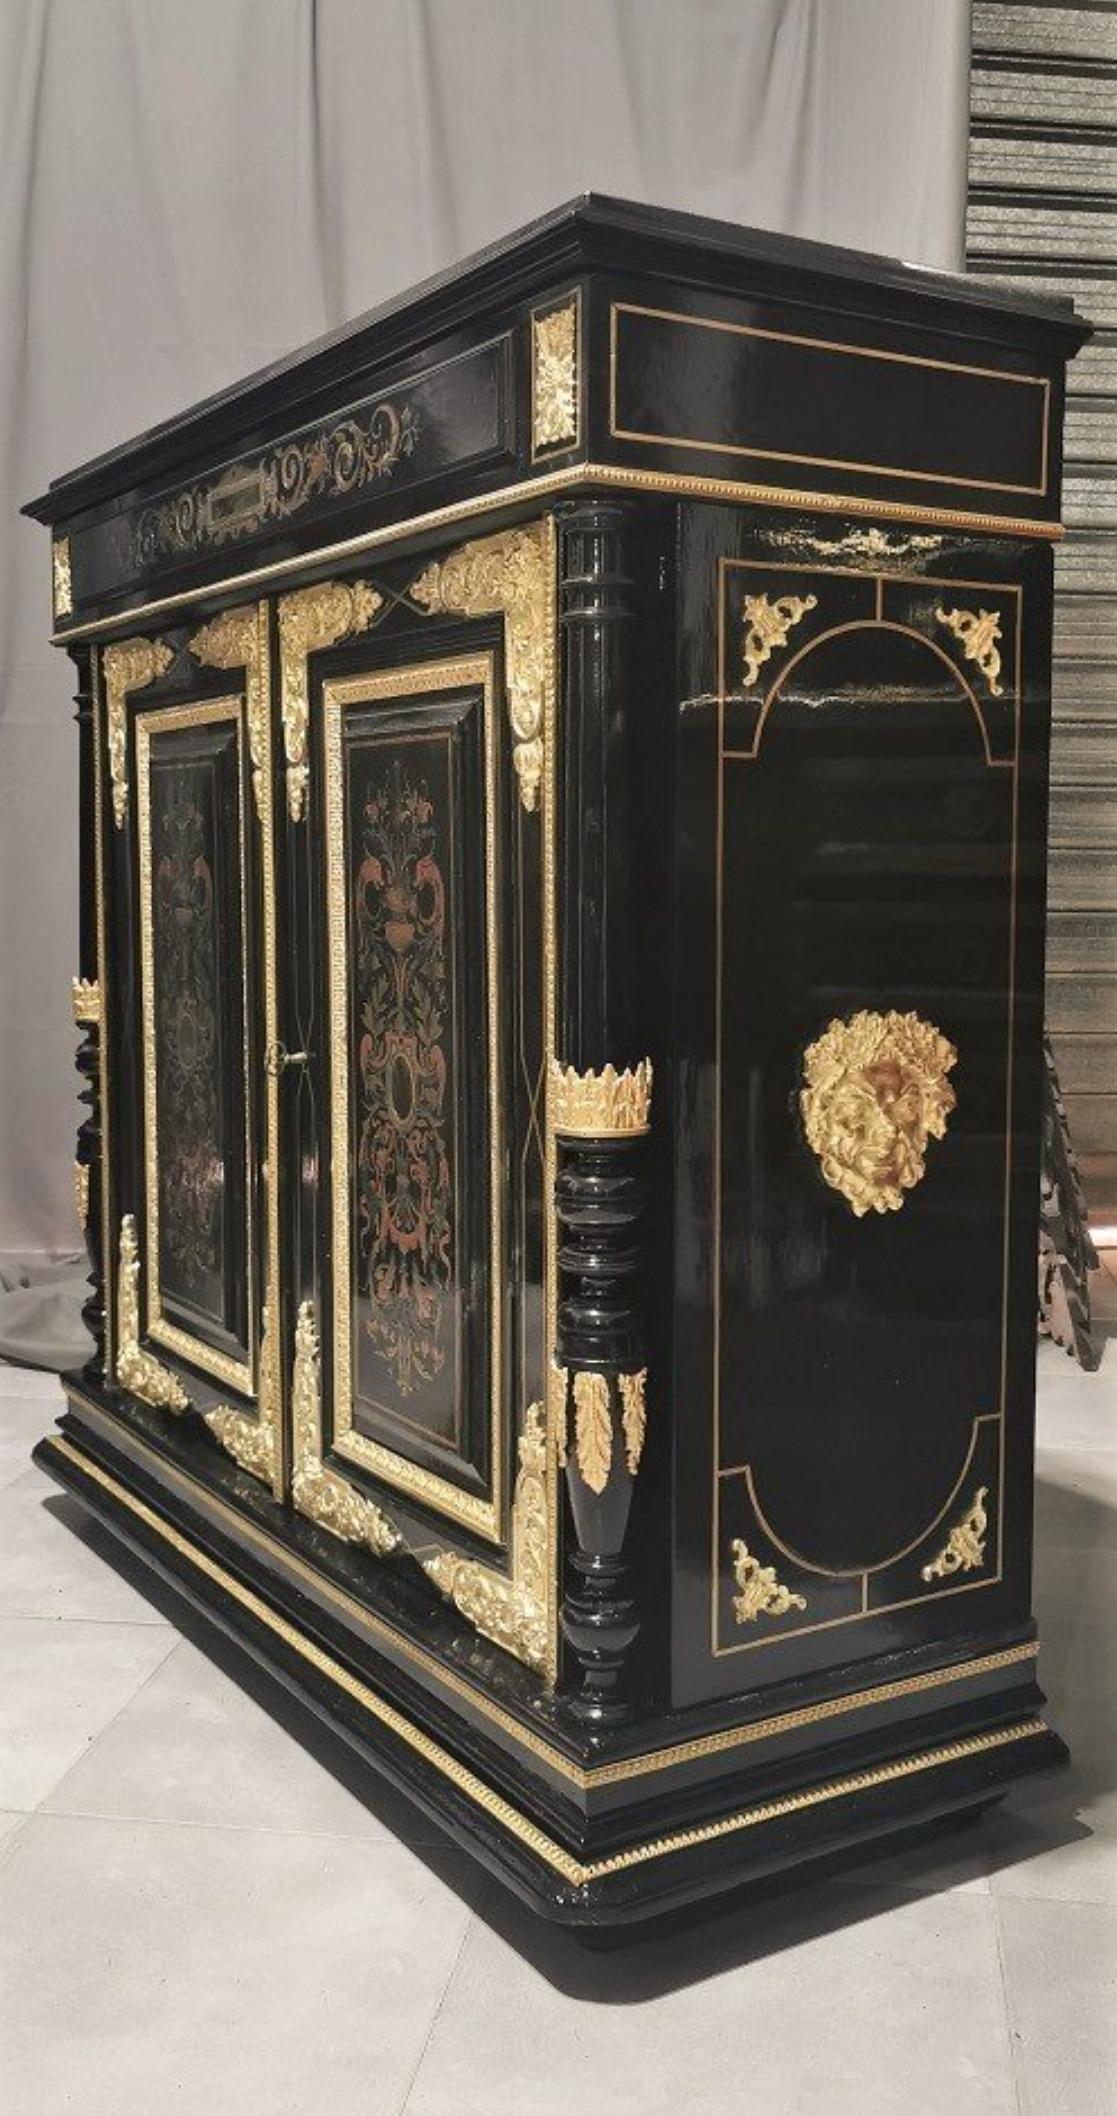 Beautiful Napoleon III Cabinet in Boulle style Marquetery made in Brass, Copper and Pewter.
Openning by 2 doors with rich Bronze ornemantions, interior with 2 shelves. Black marble top totally repolished.
France 19th Century, circa